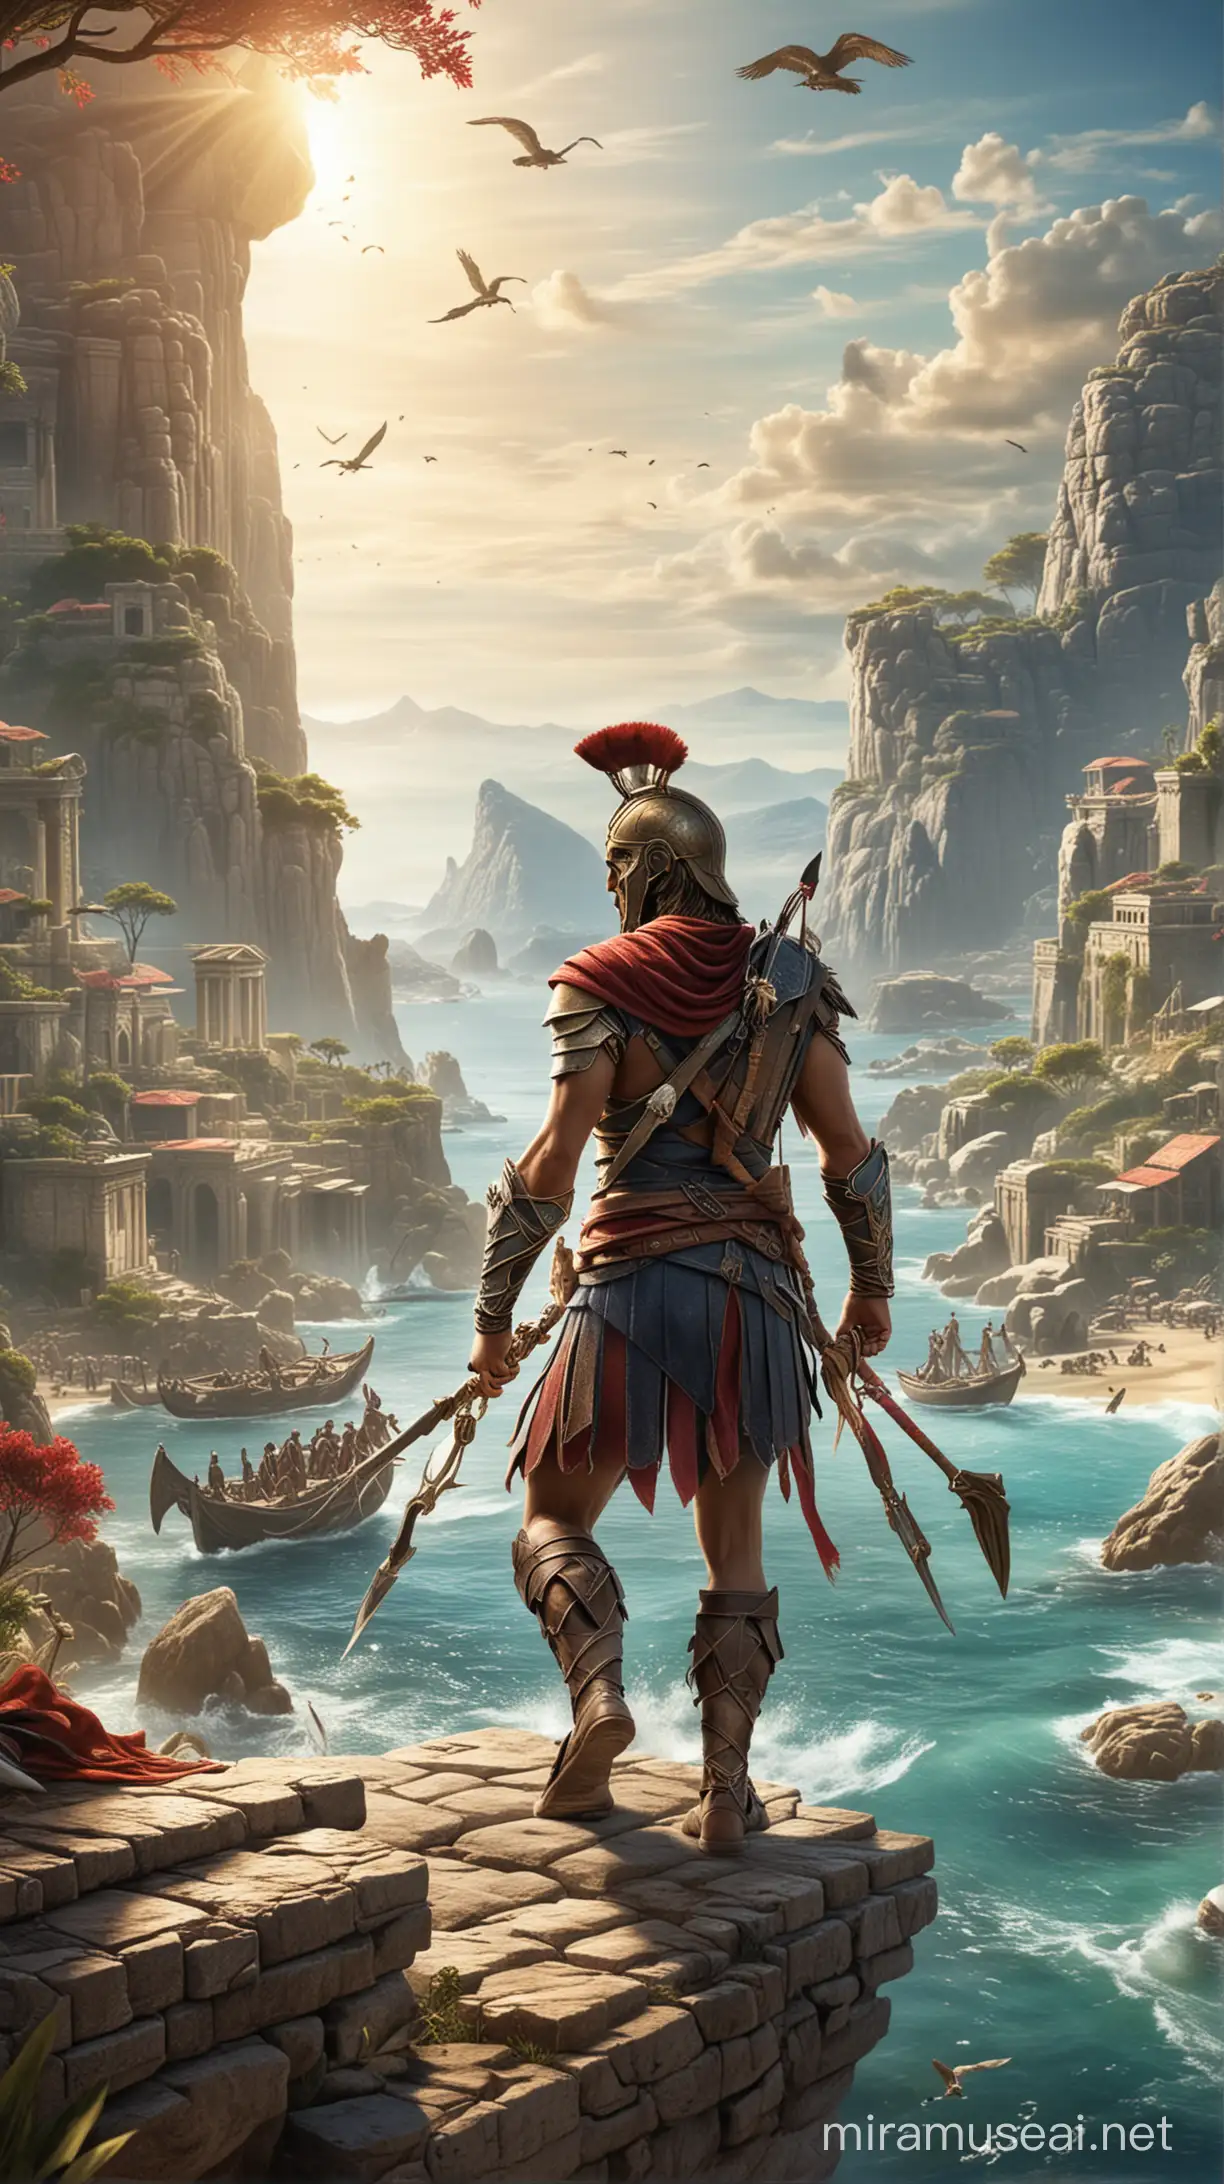 Majestic Landscapes of Assassins Creed Odyssey 4K Phone Wallpaper without Characters